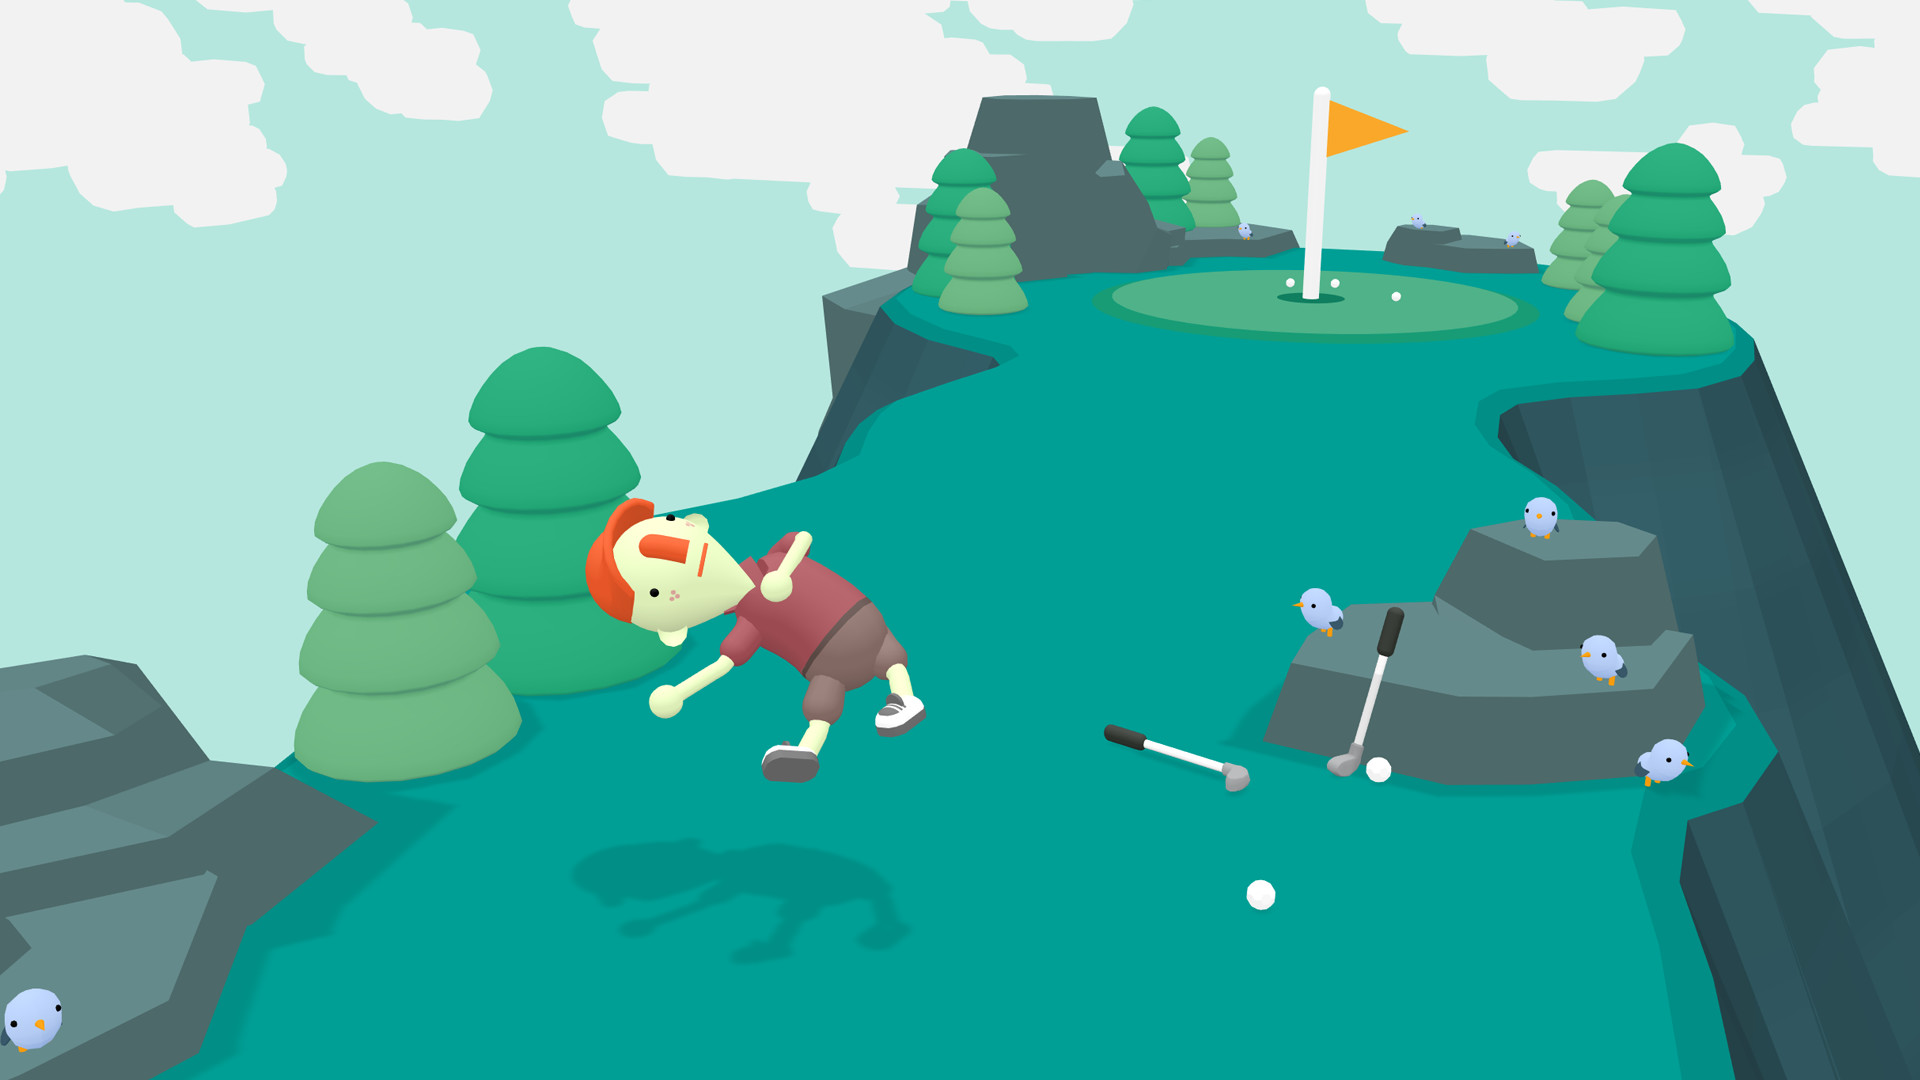 WHAT THE GOLF? on Steam